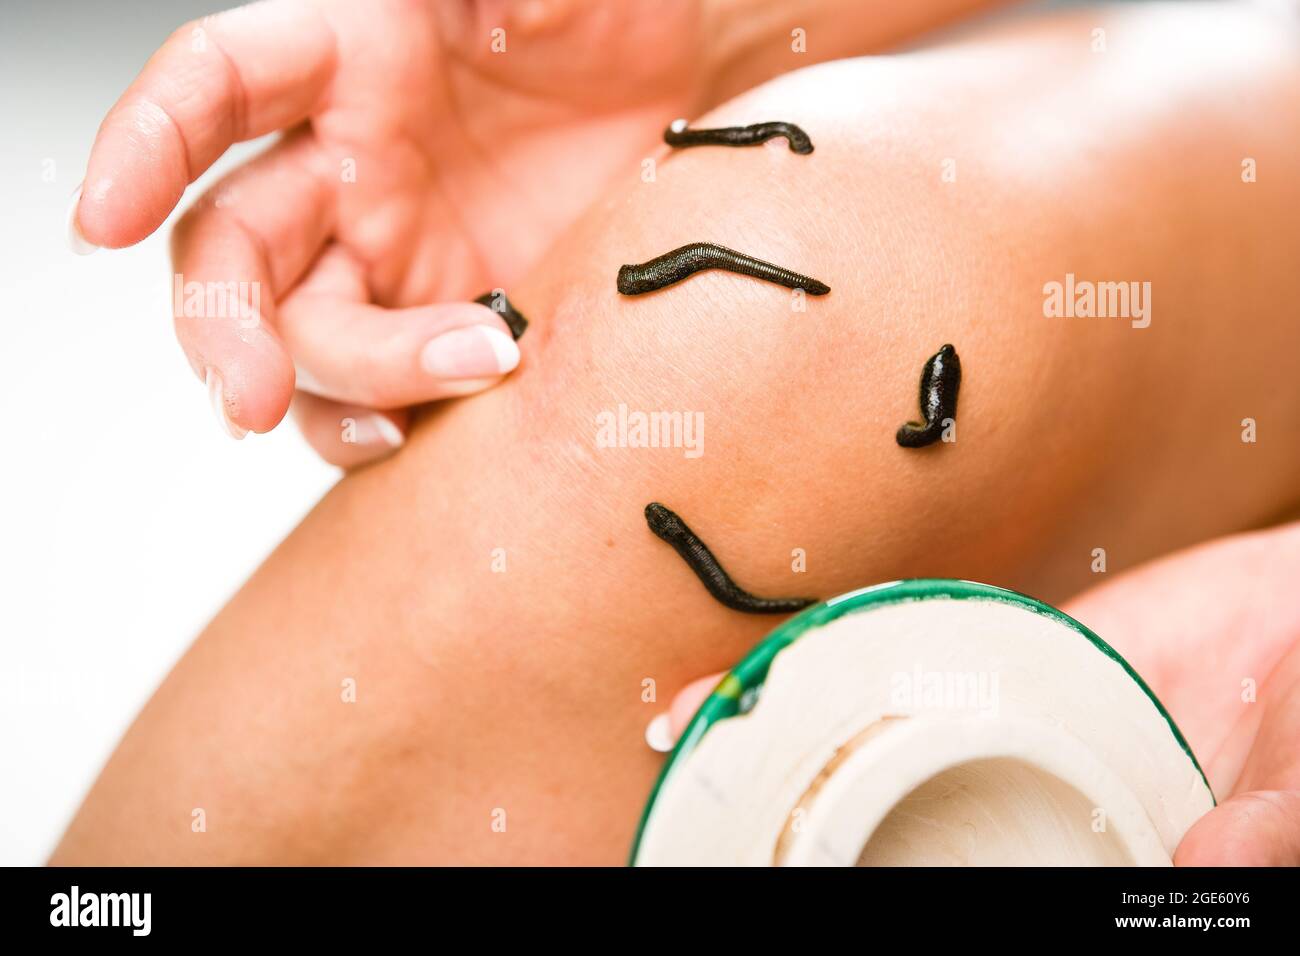 Leech therapy with medical leeches on human body. Naturopathy, health, natural medicine, good blood circulation. Stock Photo